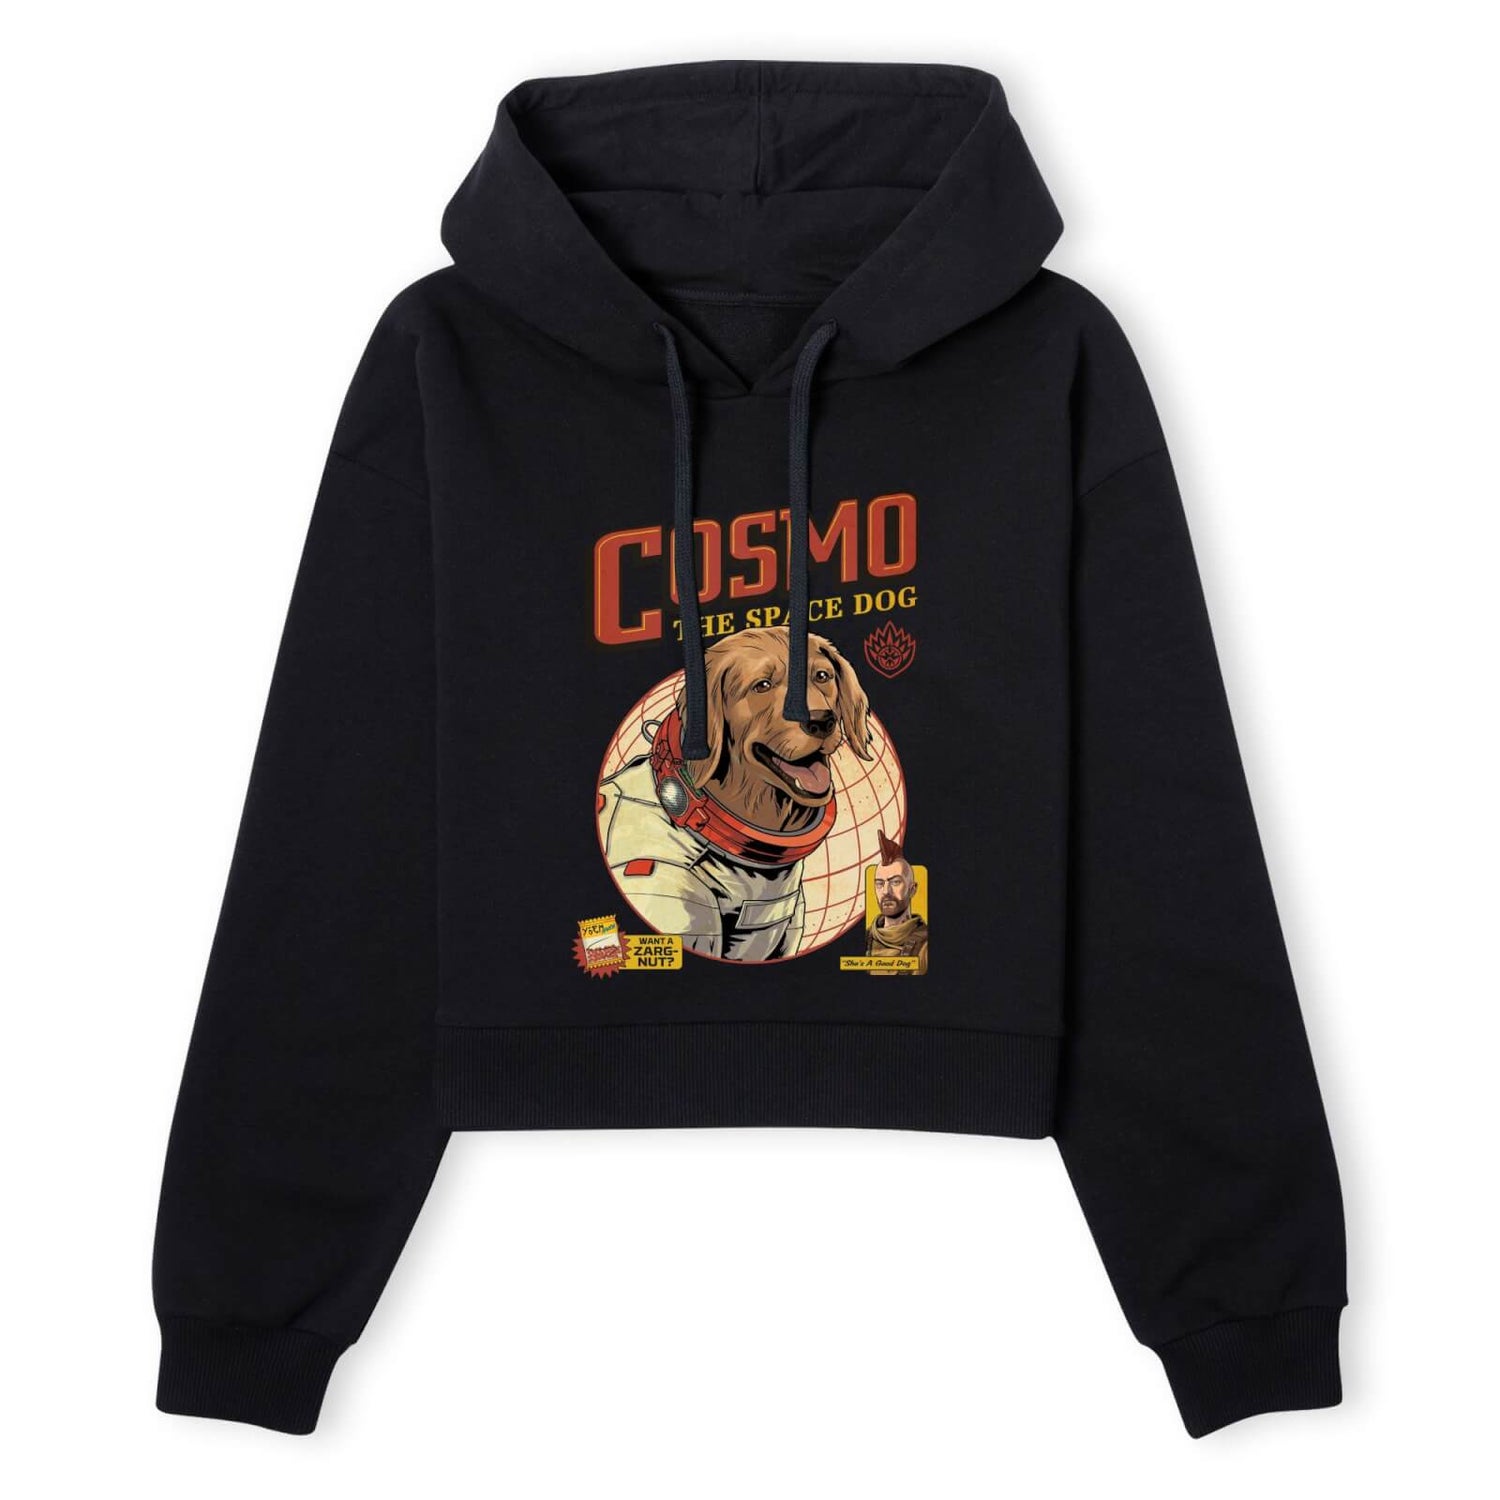 Guardians of the Galaxy Cosmo The Space Dog Women's Cropped Hoodie - Black